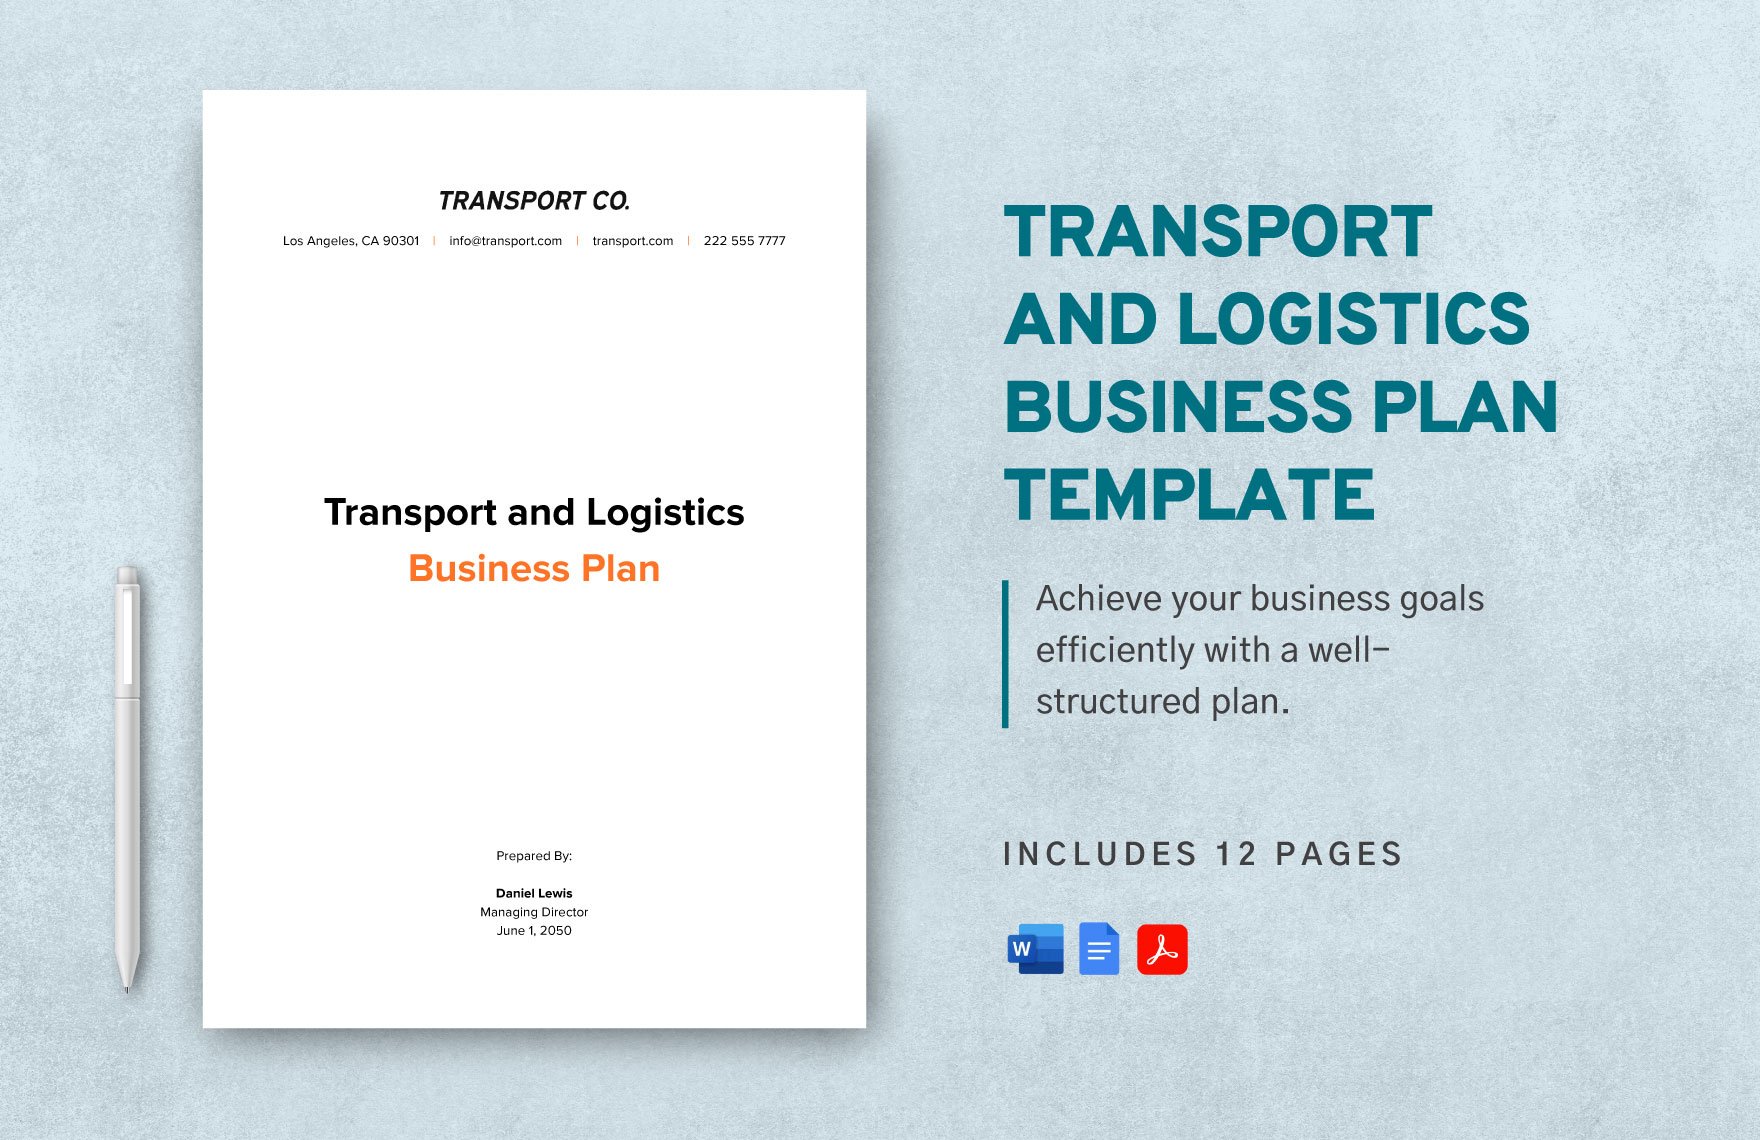 Transport and Logistics Business Plan Template